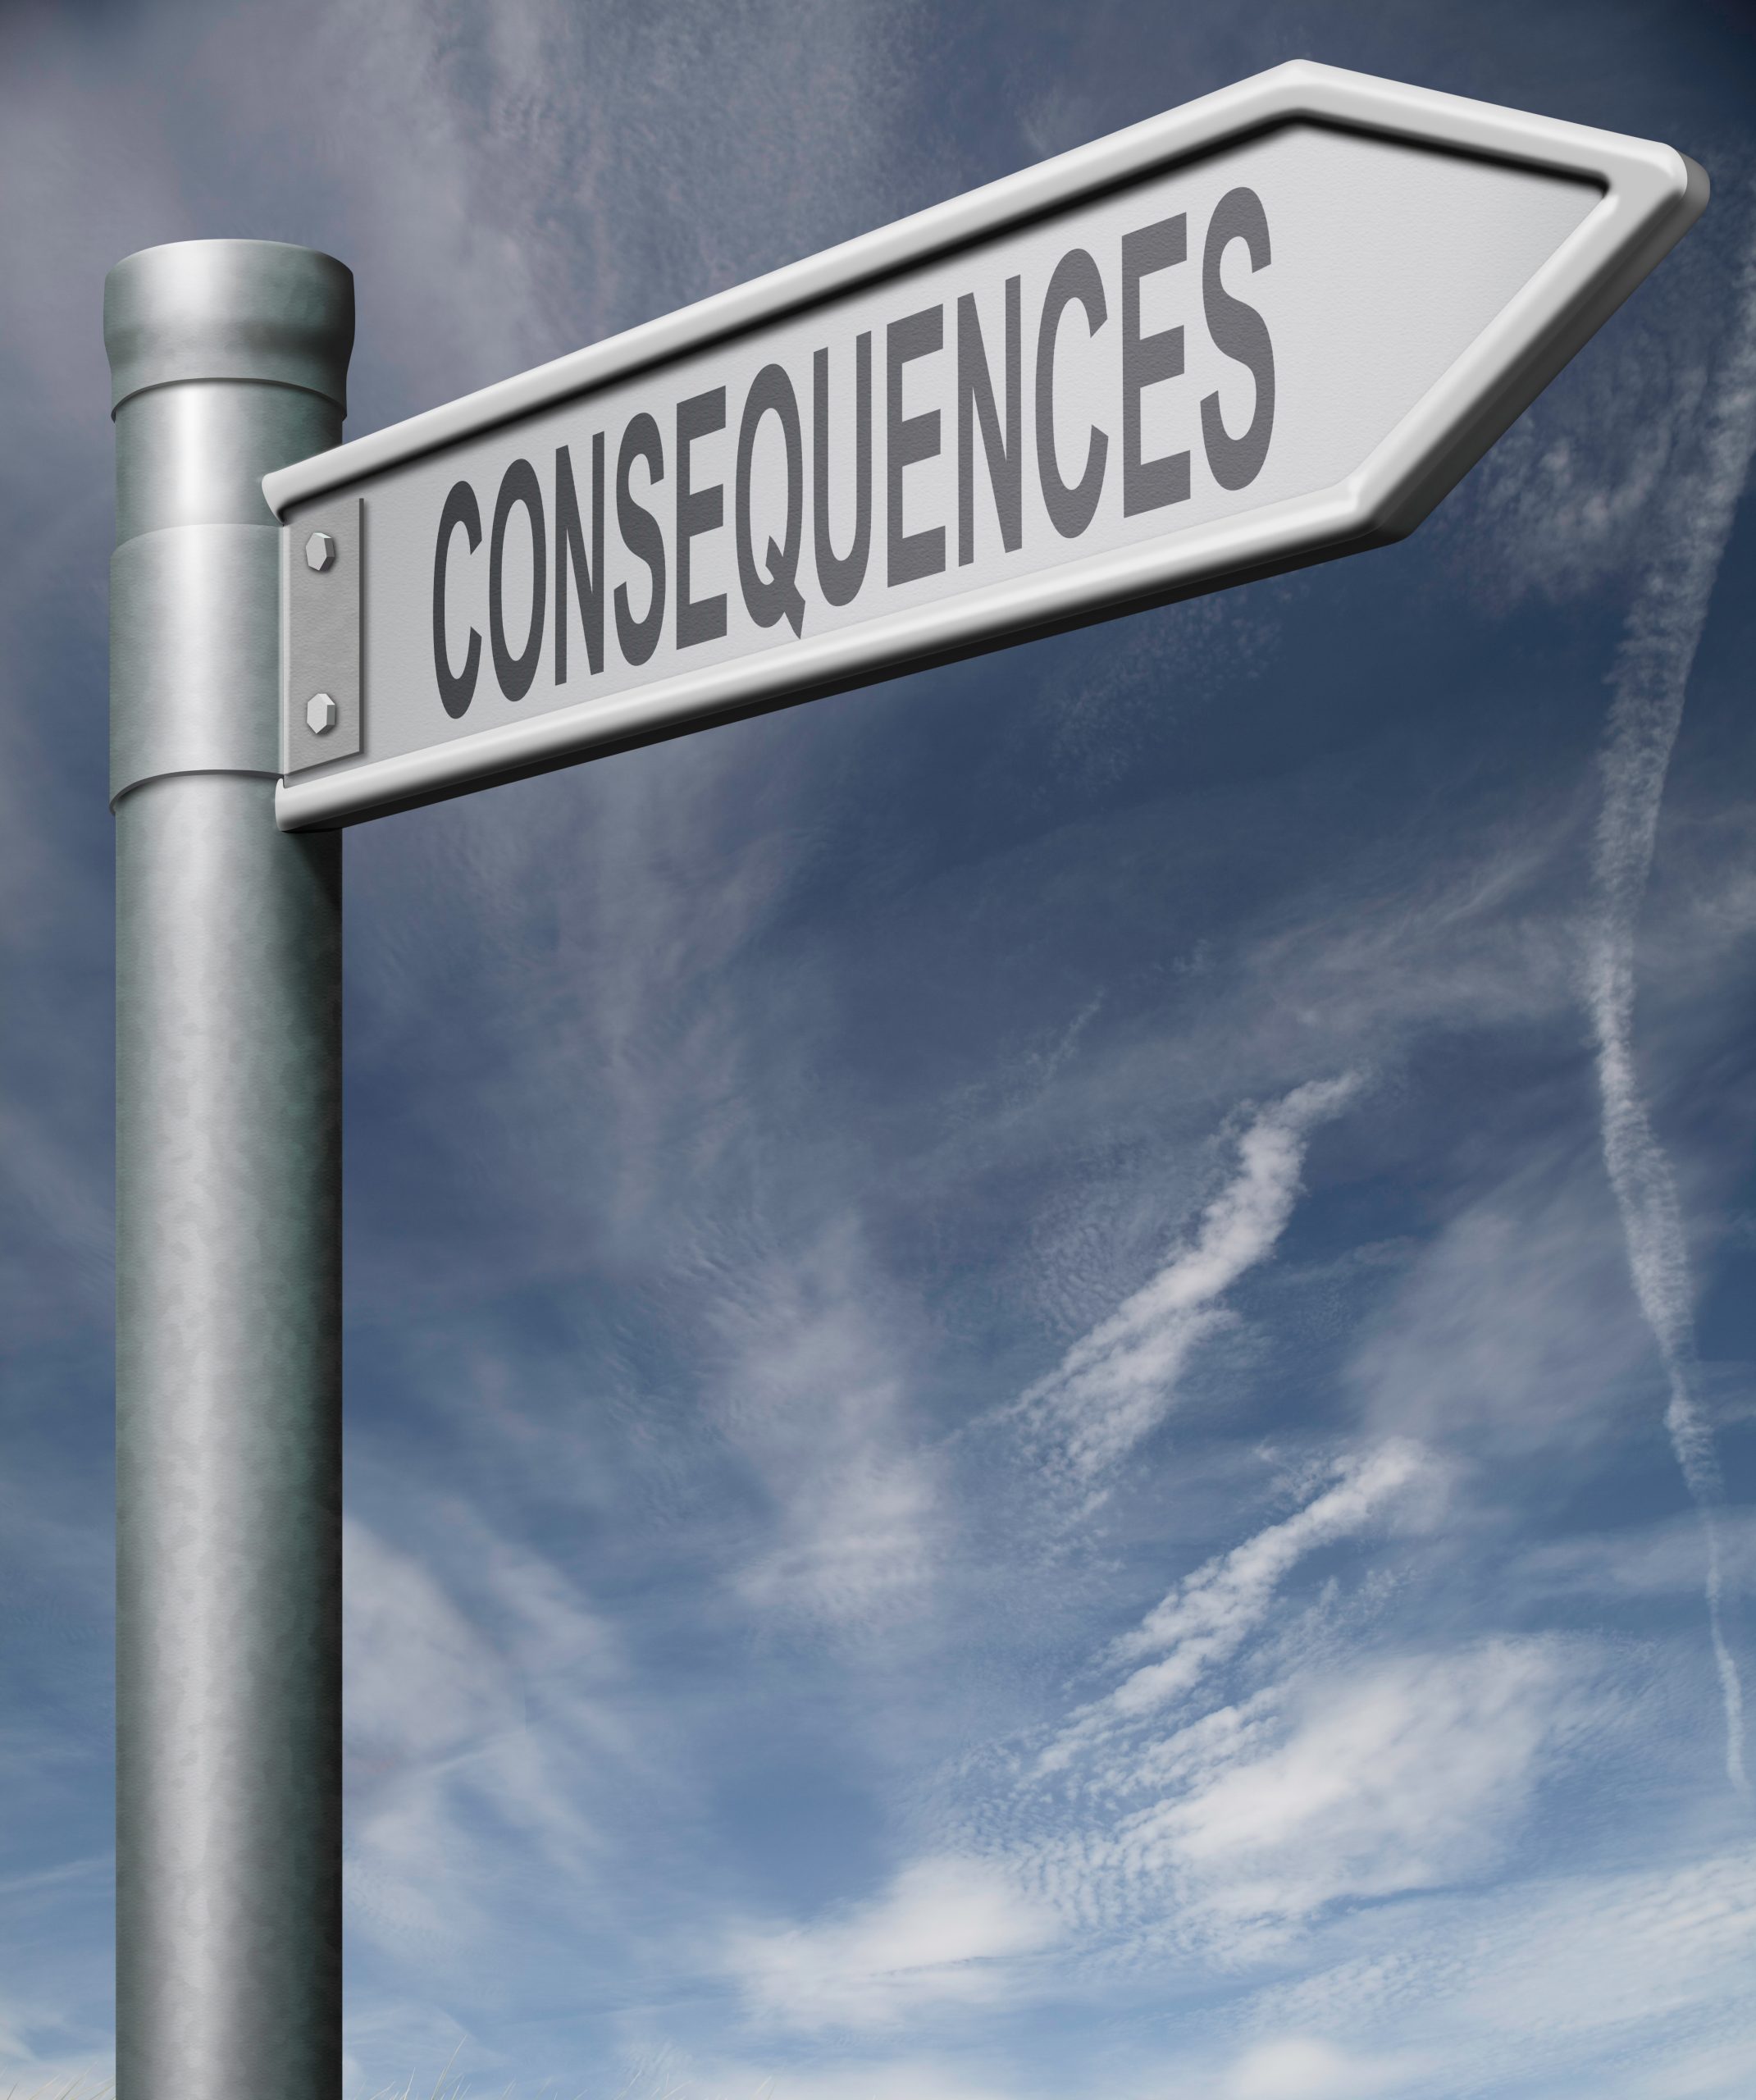 USIJ Report - https://depositphotos.com/5073168/stock-photo-consequences-road-sign-clipping-path.html